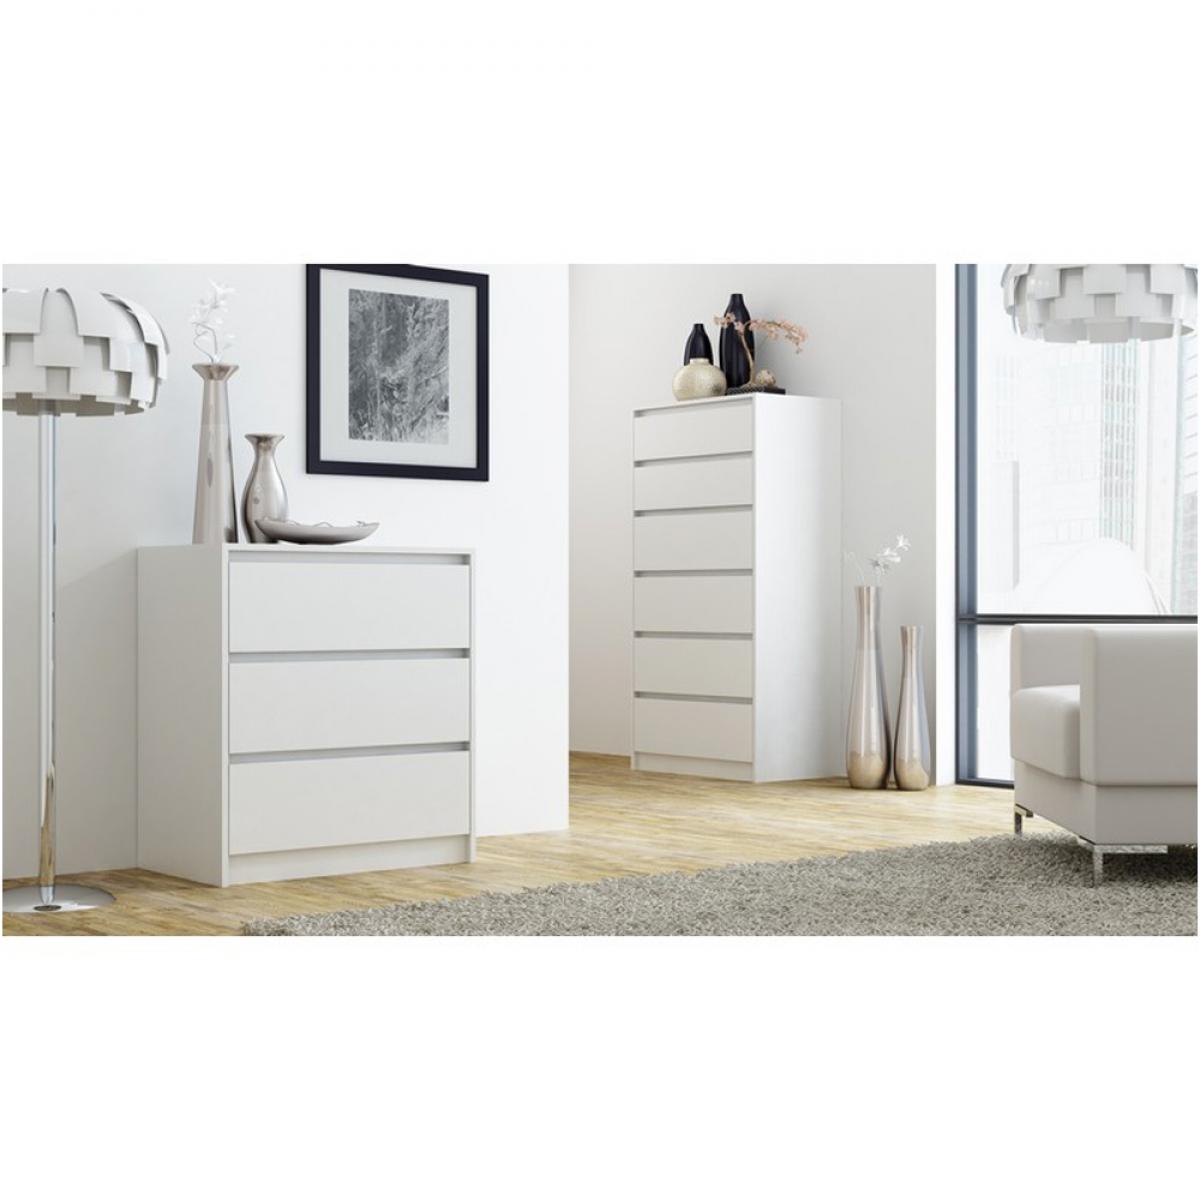 selsey commode - climiconia - 70 cm - blanc - 3 tiroirs - style scandinave  blanc